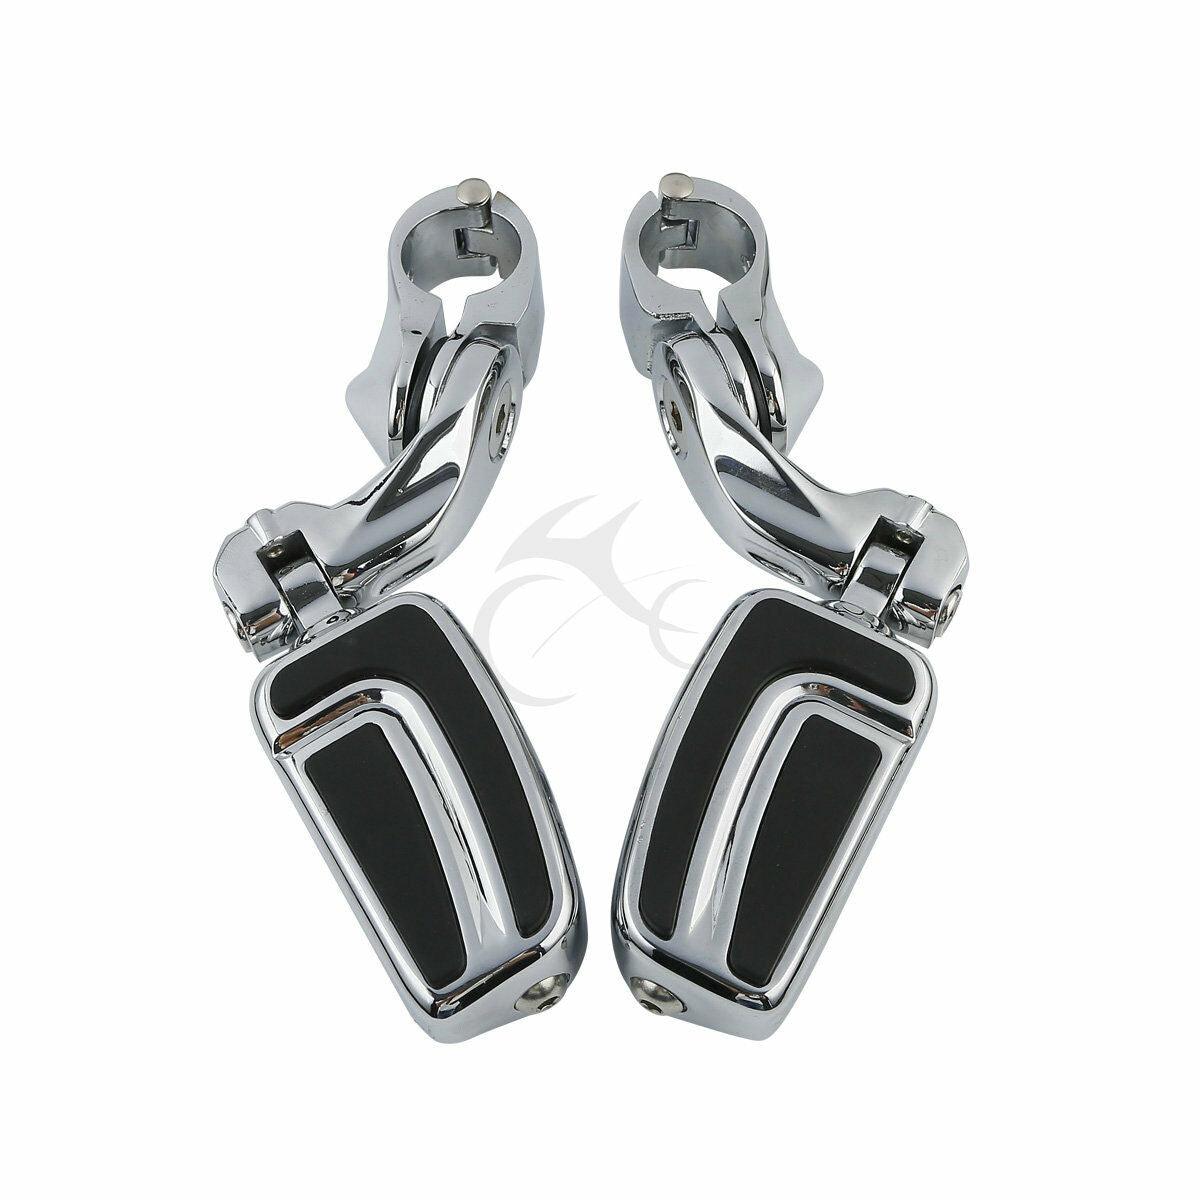 Airflow Chrome Footpeg Highway Bar Pegs Short Angled Fit For Harley Street Glide - Moto Life Products